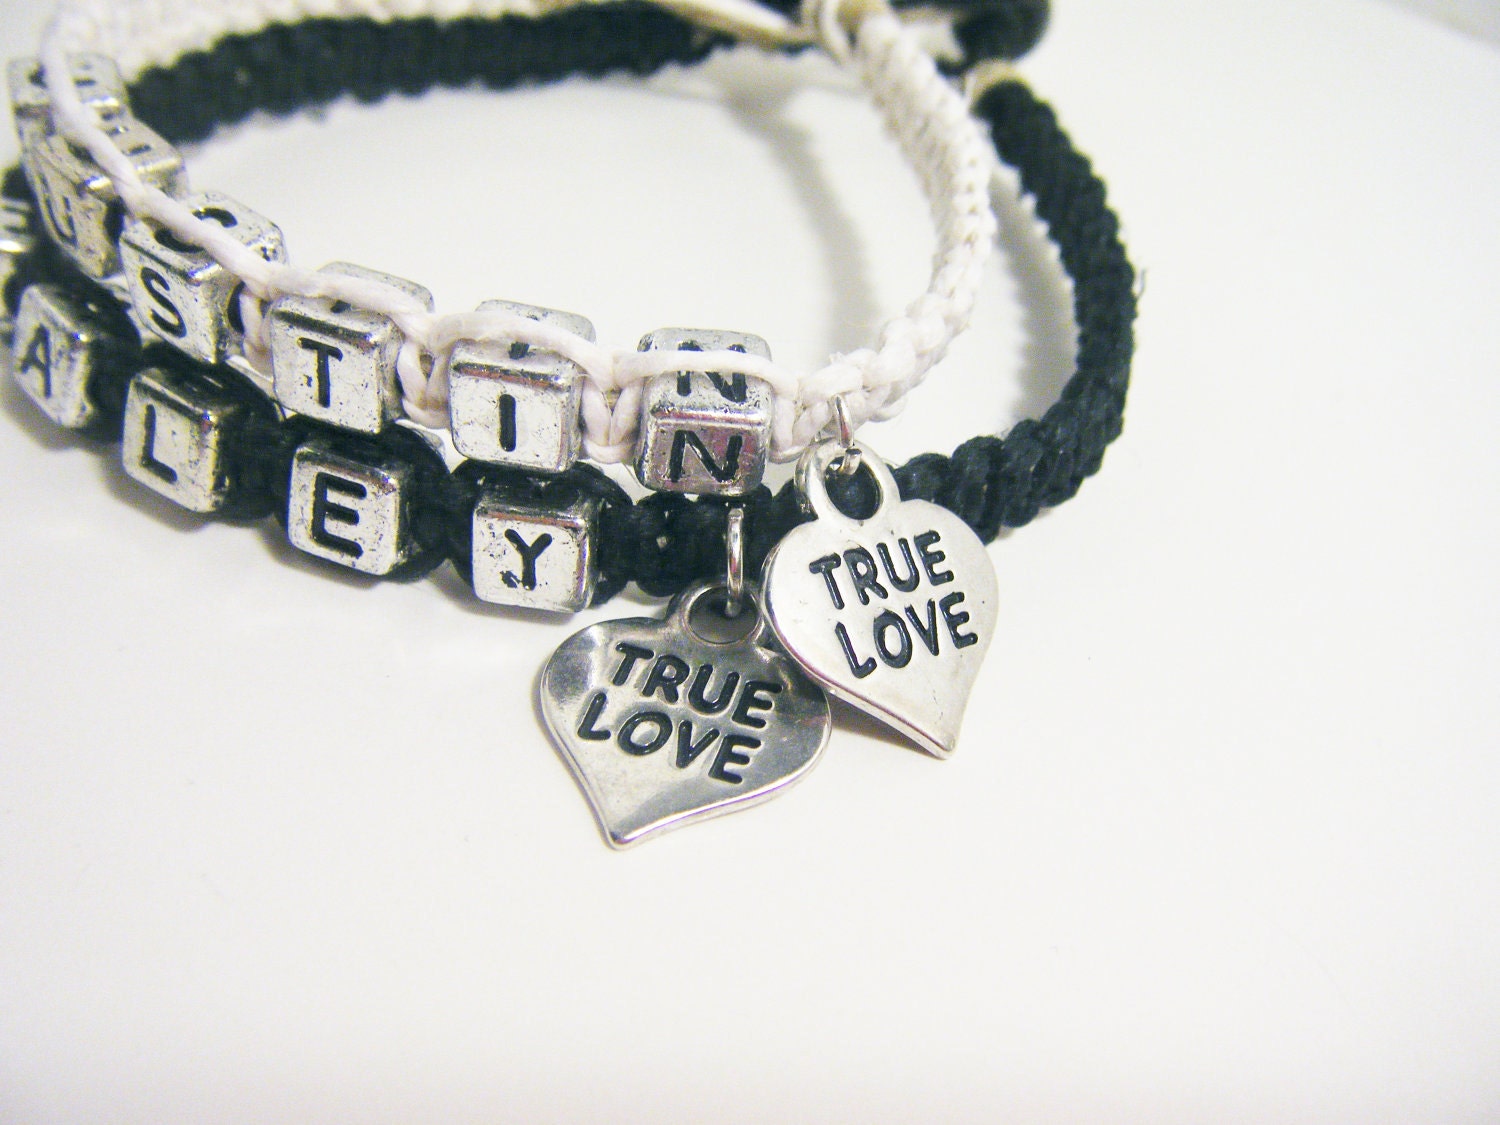 Couples True Love Charm Bracelets Set of 2 MADE TO ORDER-1 Week production time